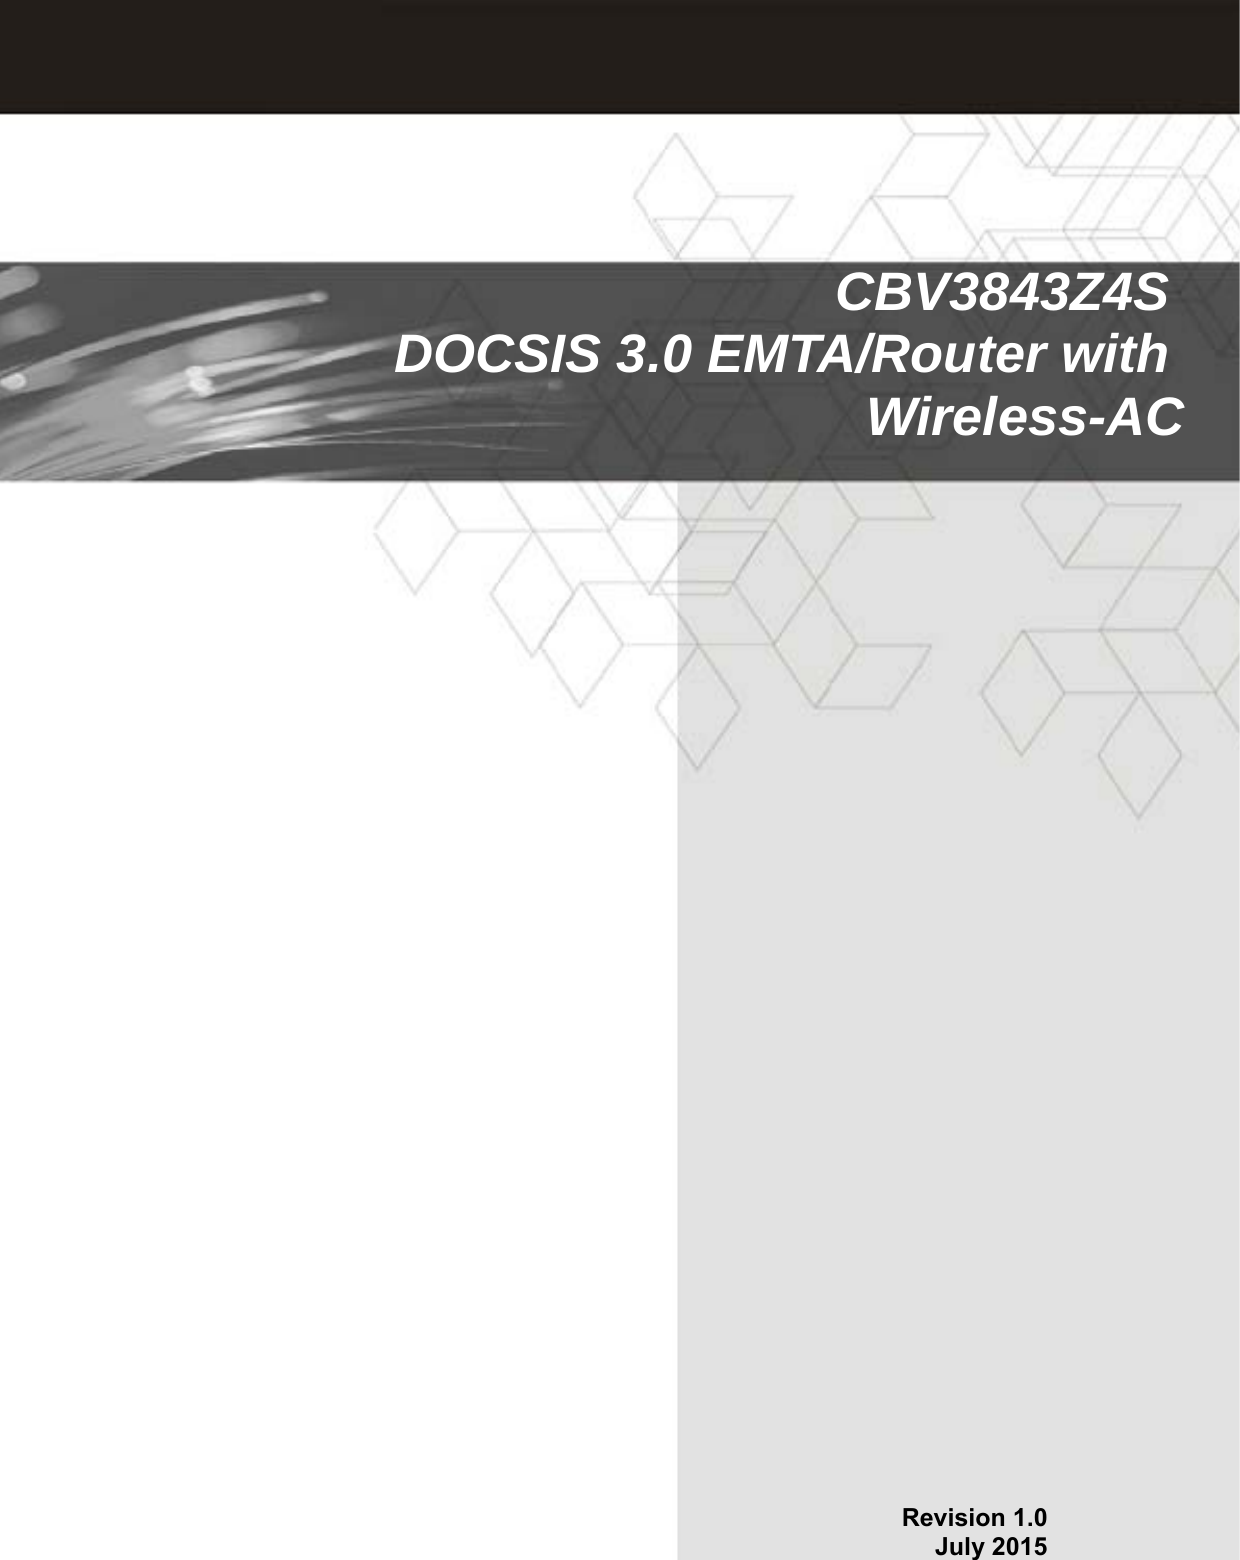  Revision 1.0 July 2015CBV3843Z4S   DOCSIS 3.0 EMTA/Router with Wireless-AC